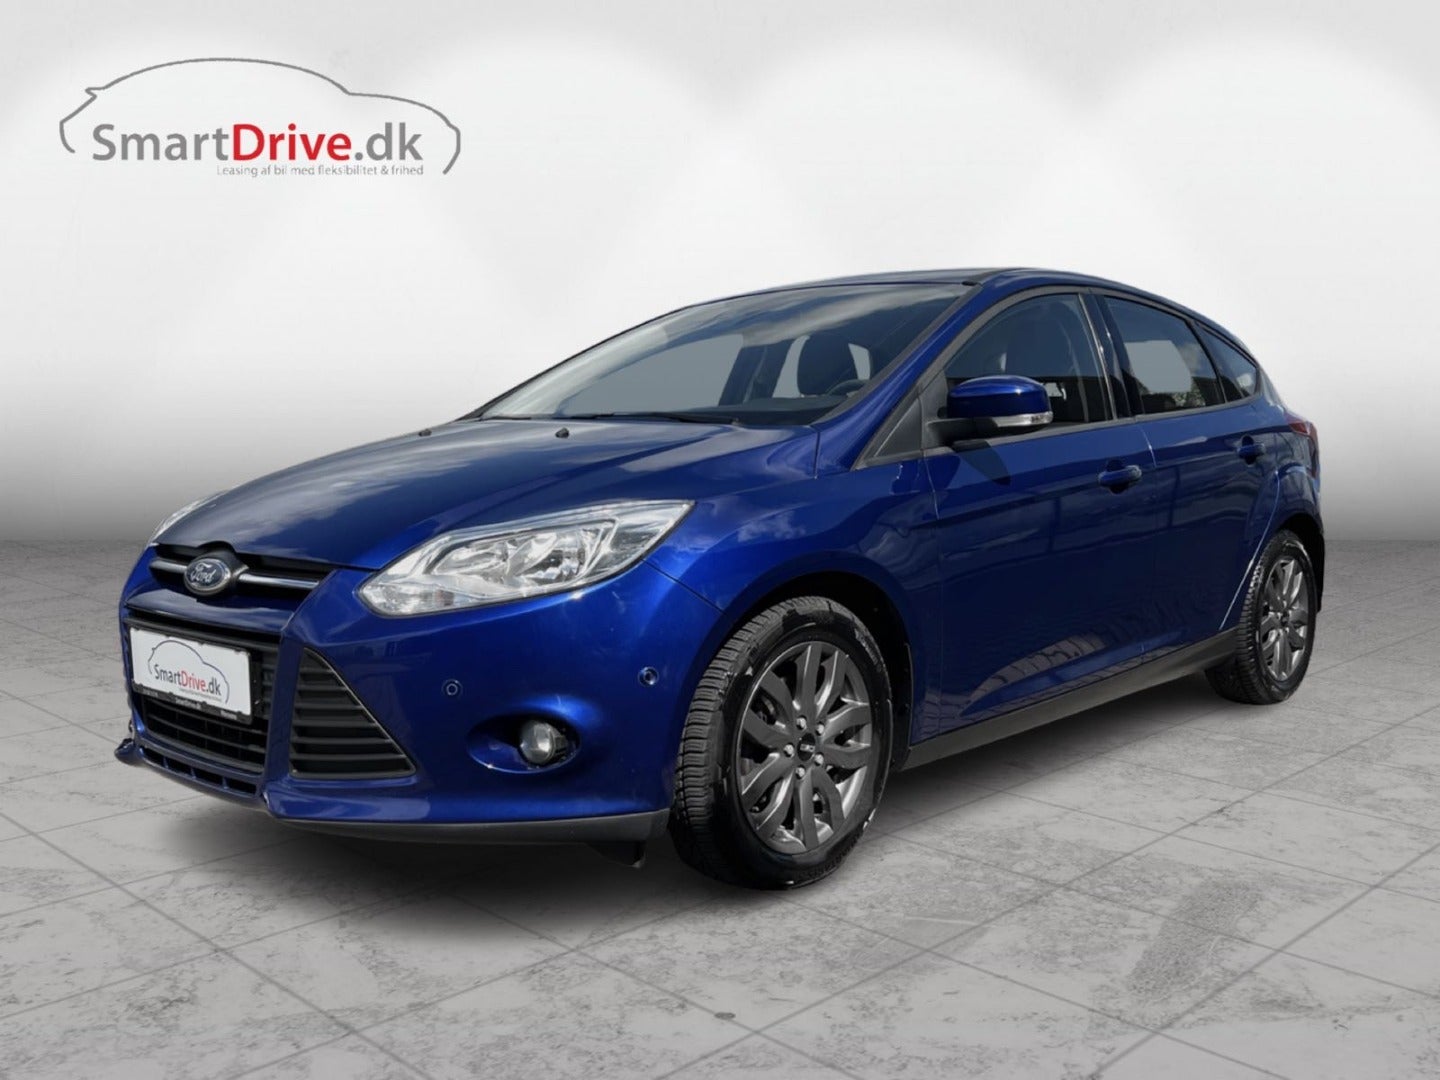 Ford Focus 1,6 TDCi 105 Trend ECO